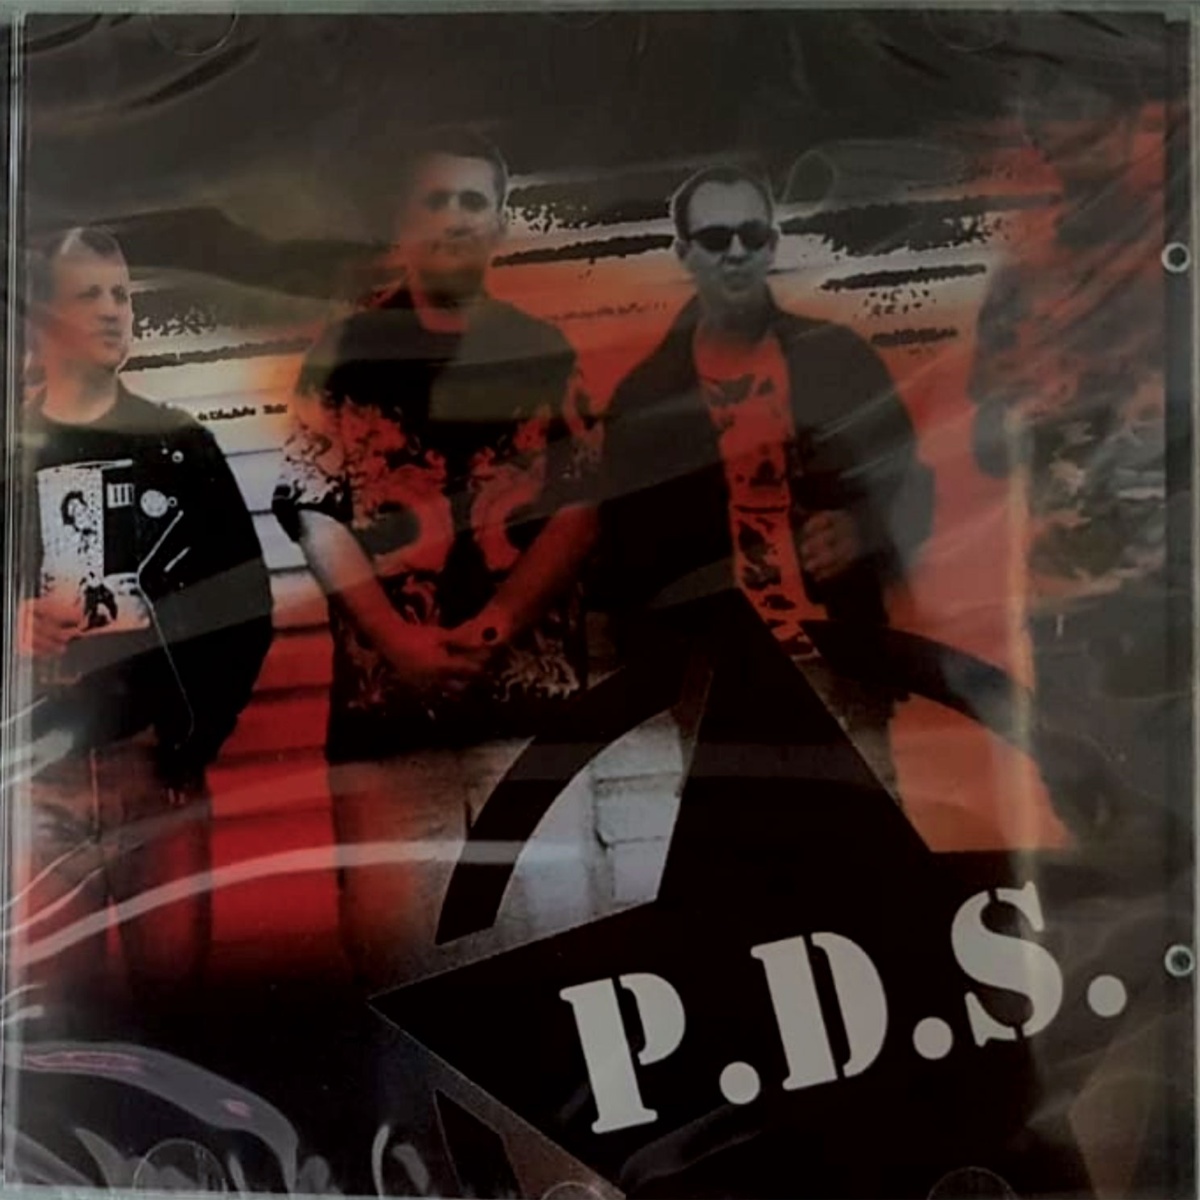 picture of the P.D.S S/T CD